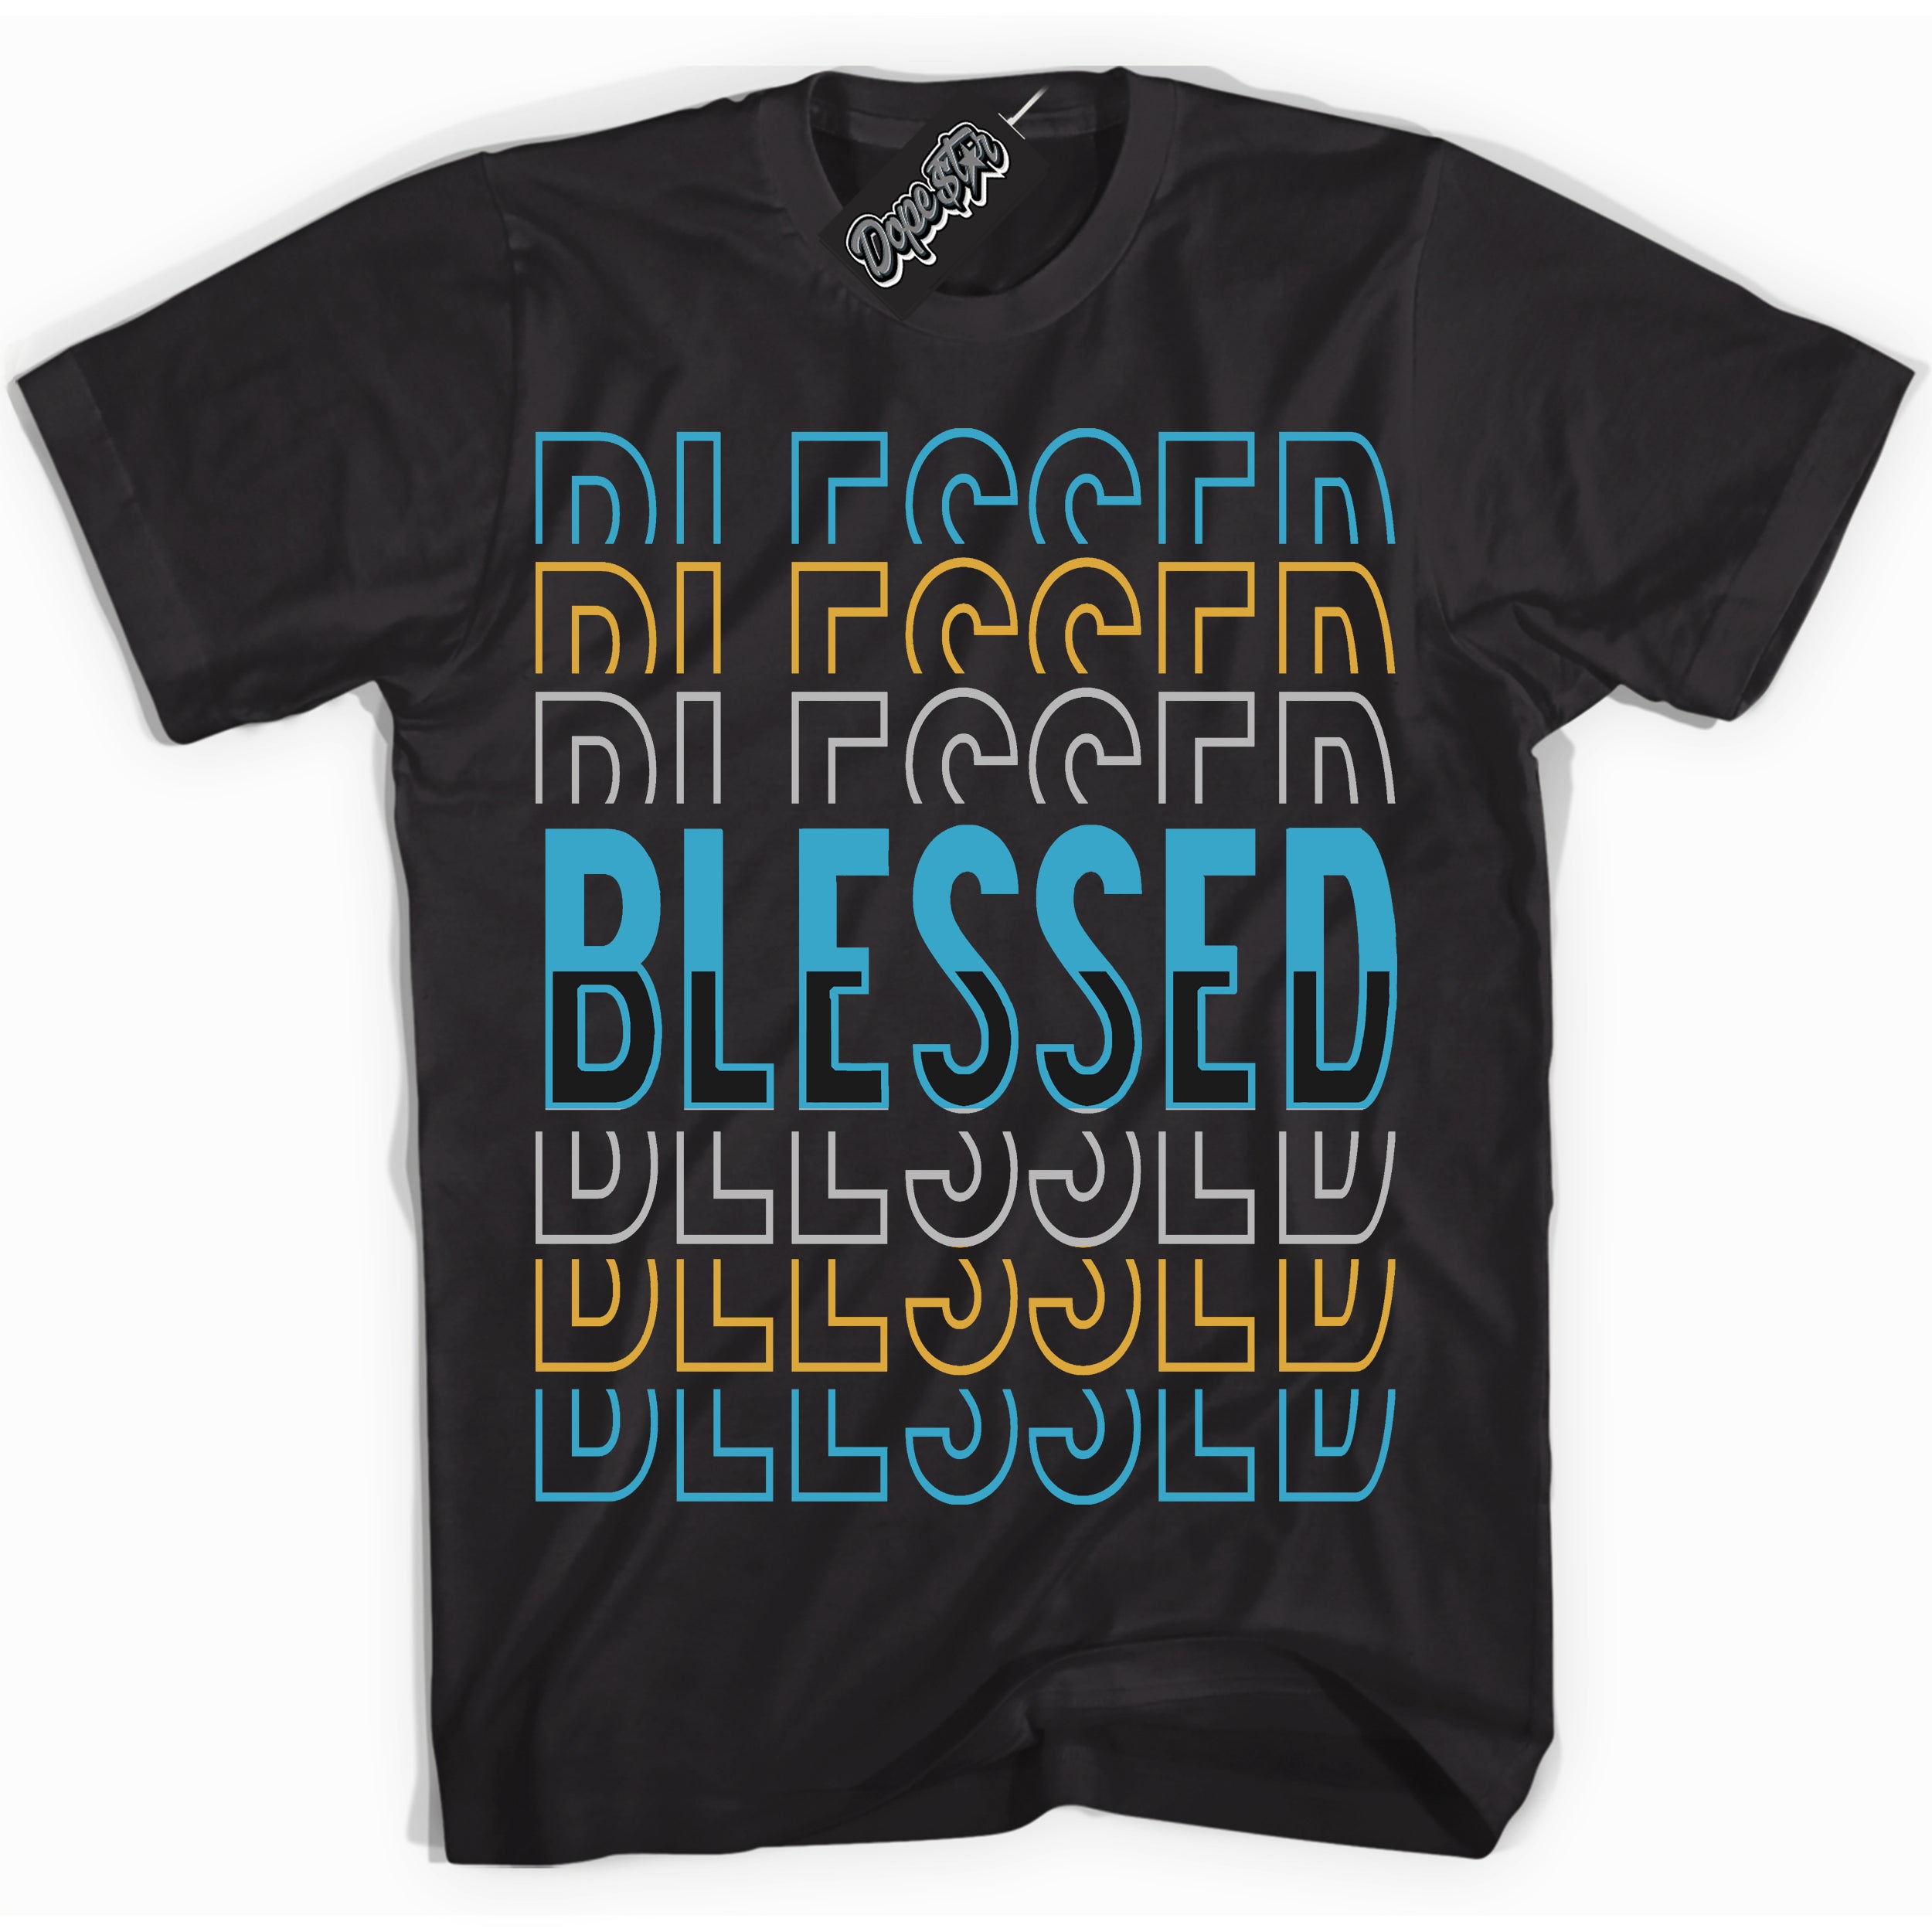 Cool Black Shirt with “ Blessed Stacked” design that perfectly matches Aqua 5s Sneakers.